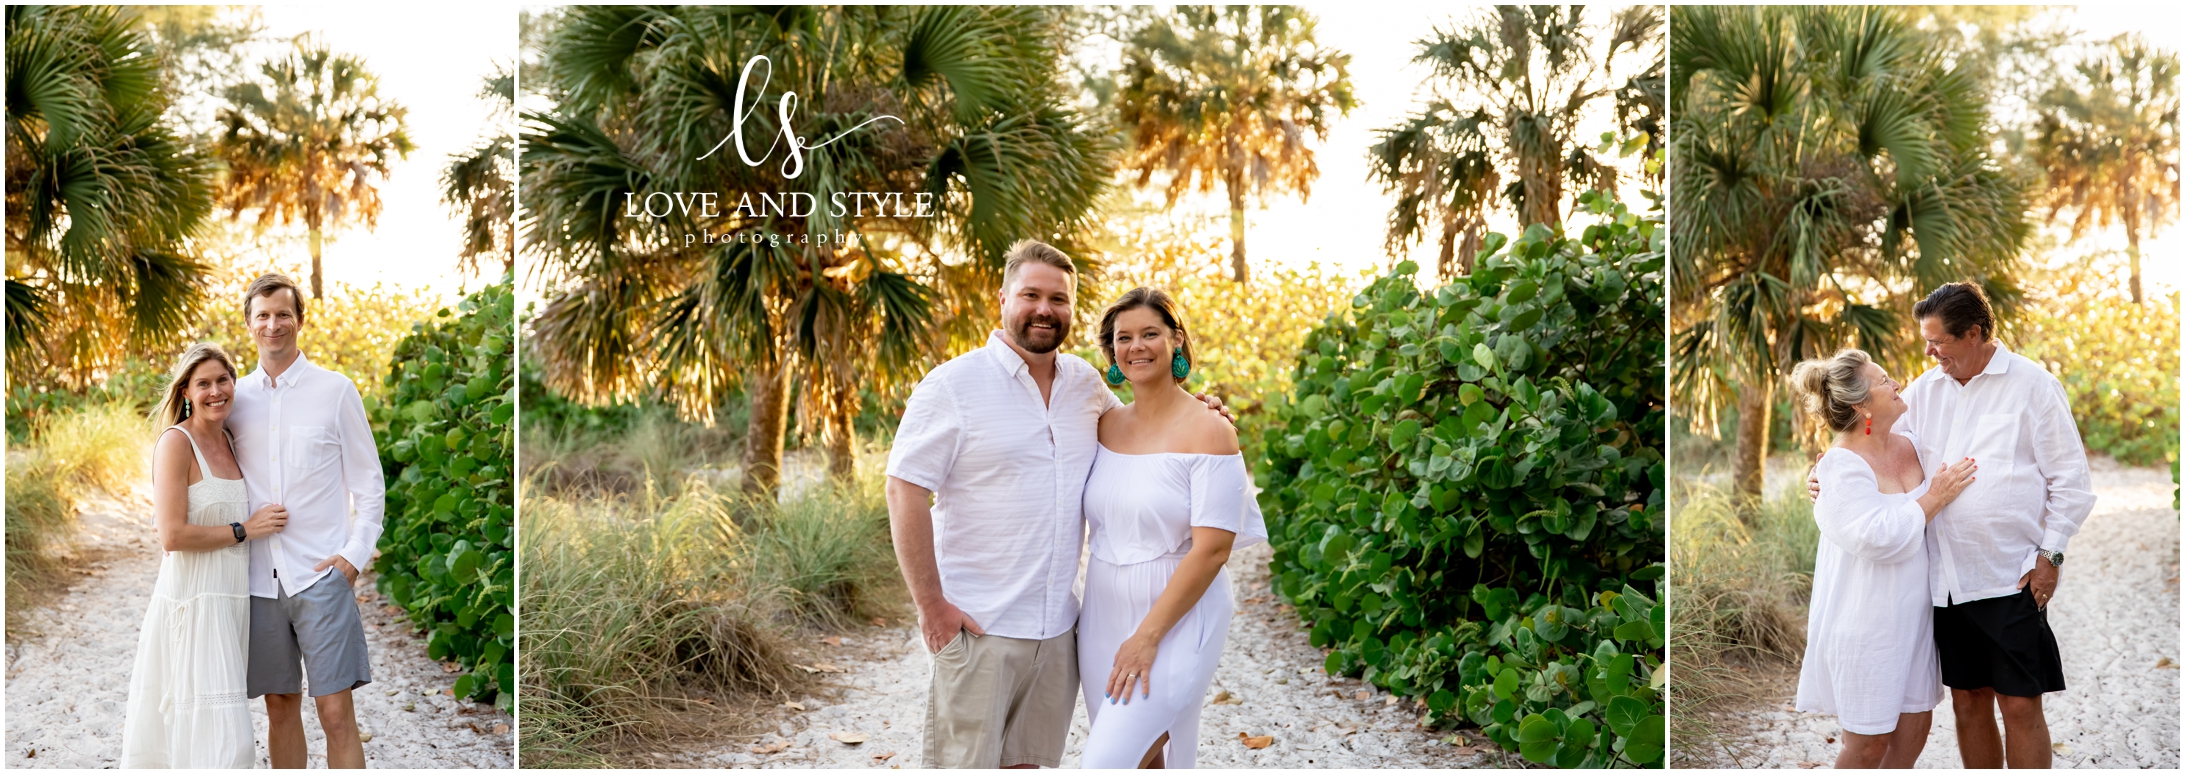 Family Photographer Anna Maria Island in the beach path with palm trees